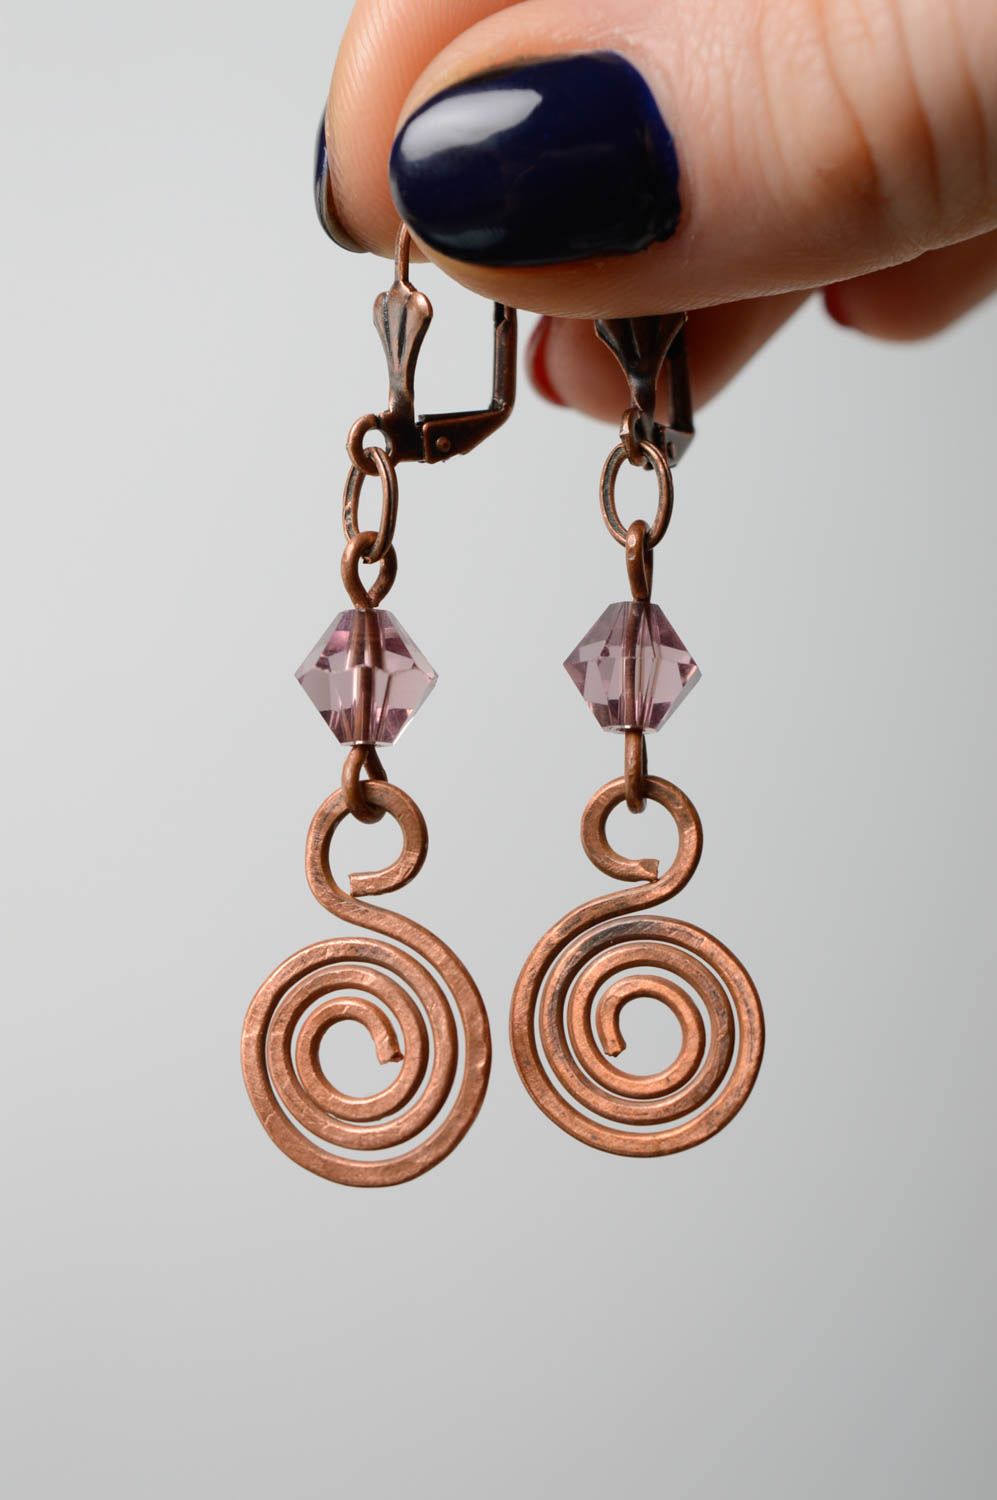 Copper earrings made using wire wrap technqiue photo 5